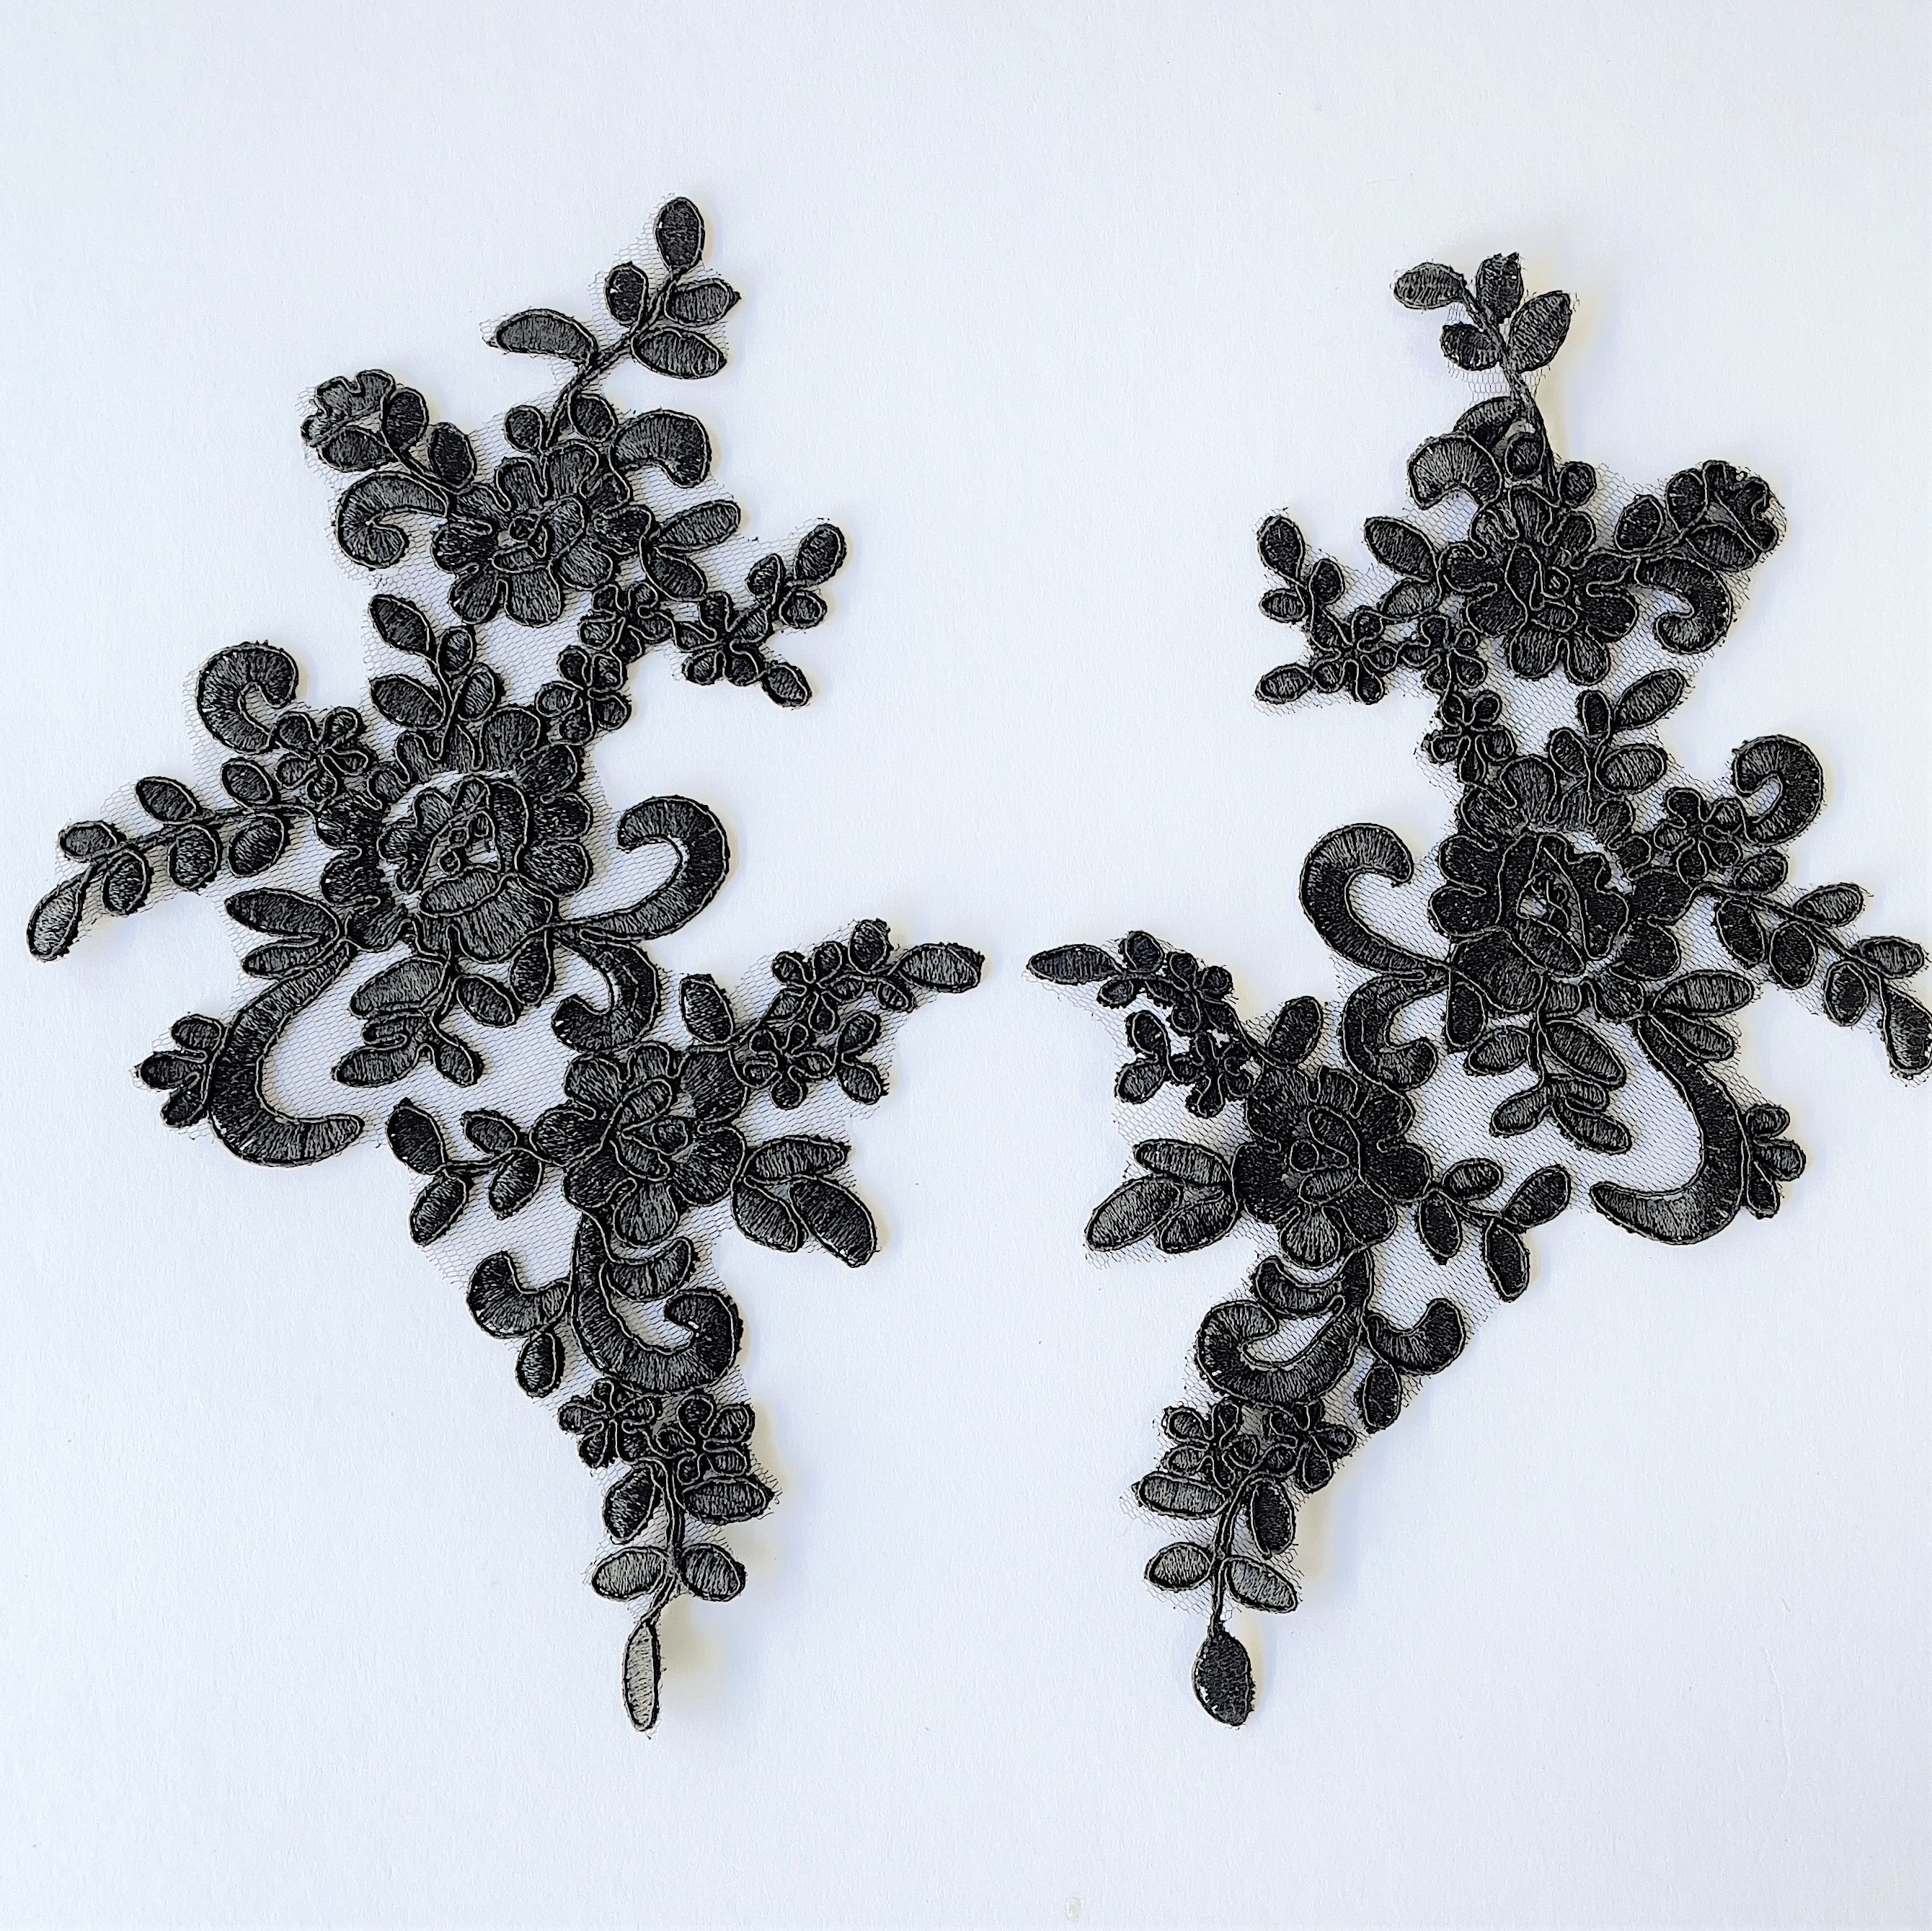 A pair of black corded appliques in a floral design. laying flat on a white background.